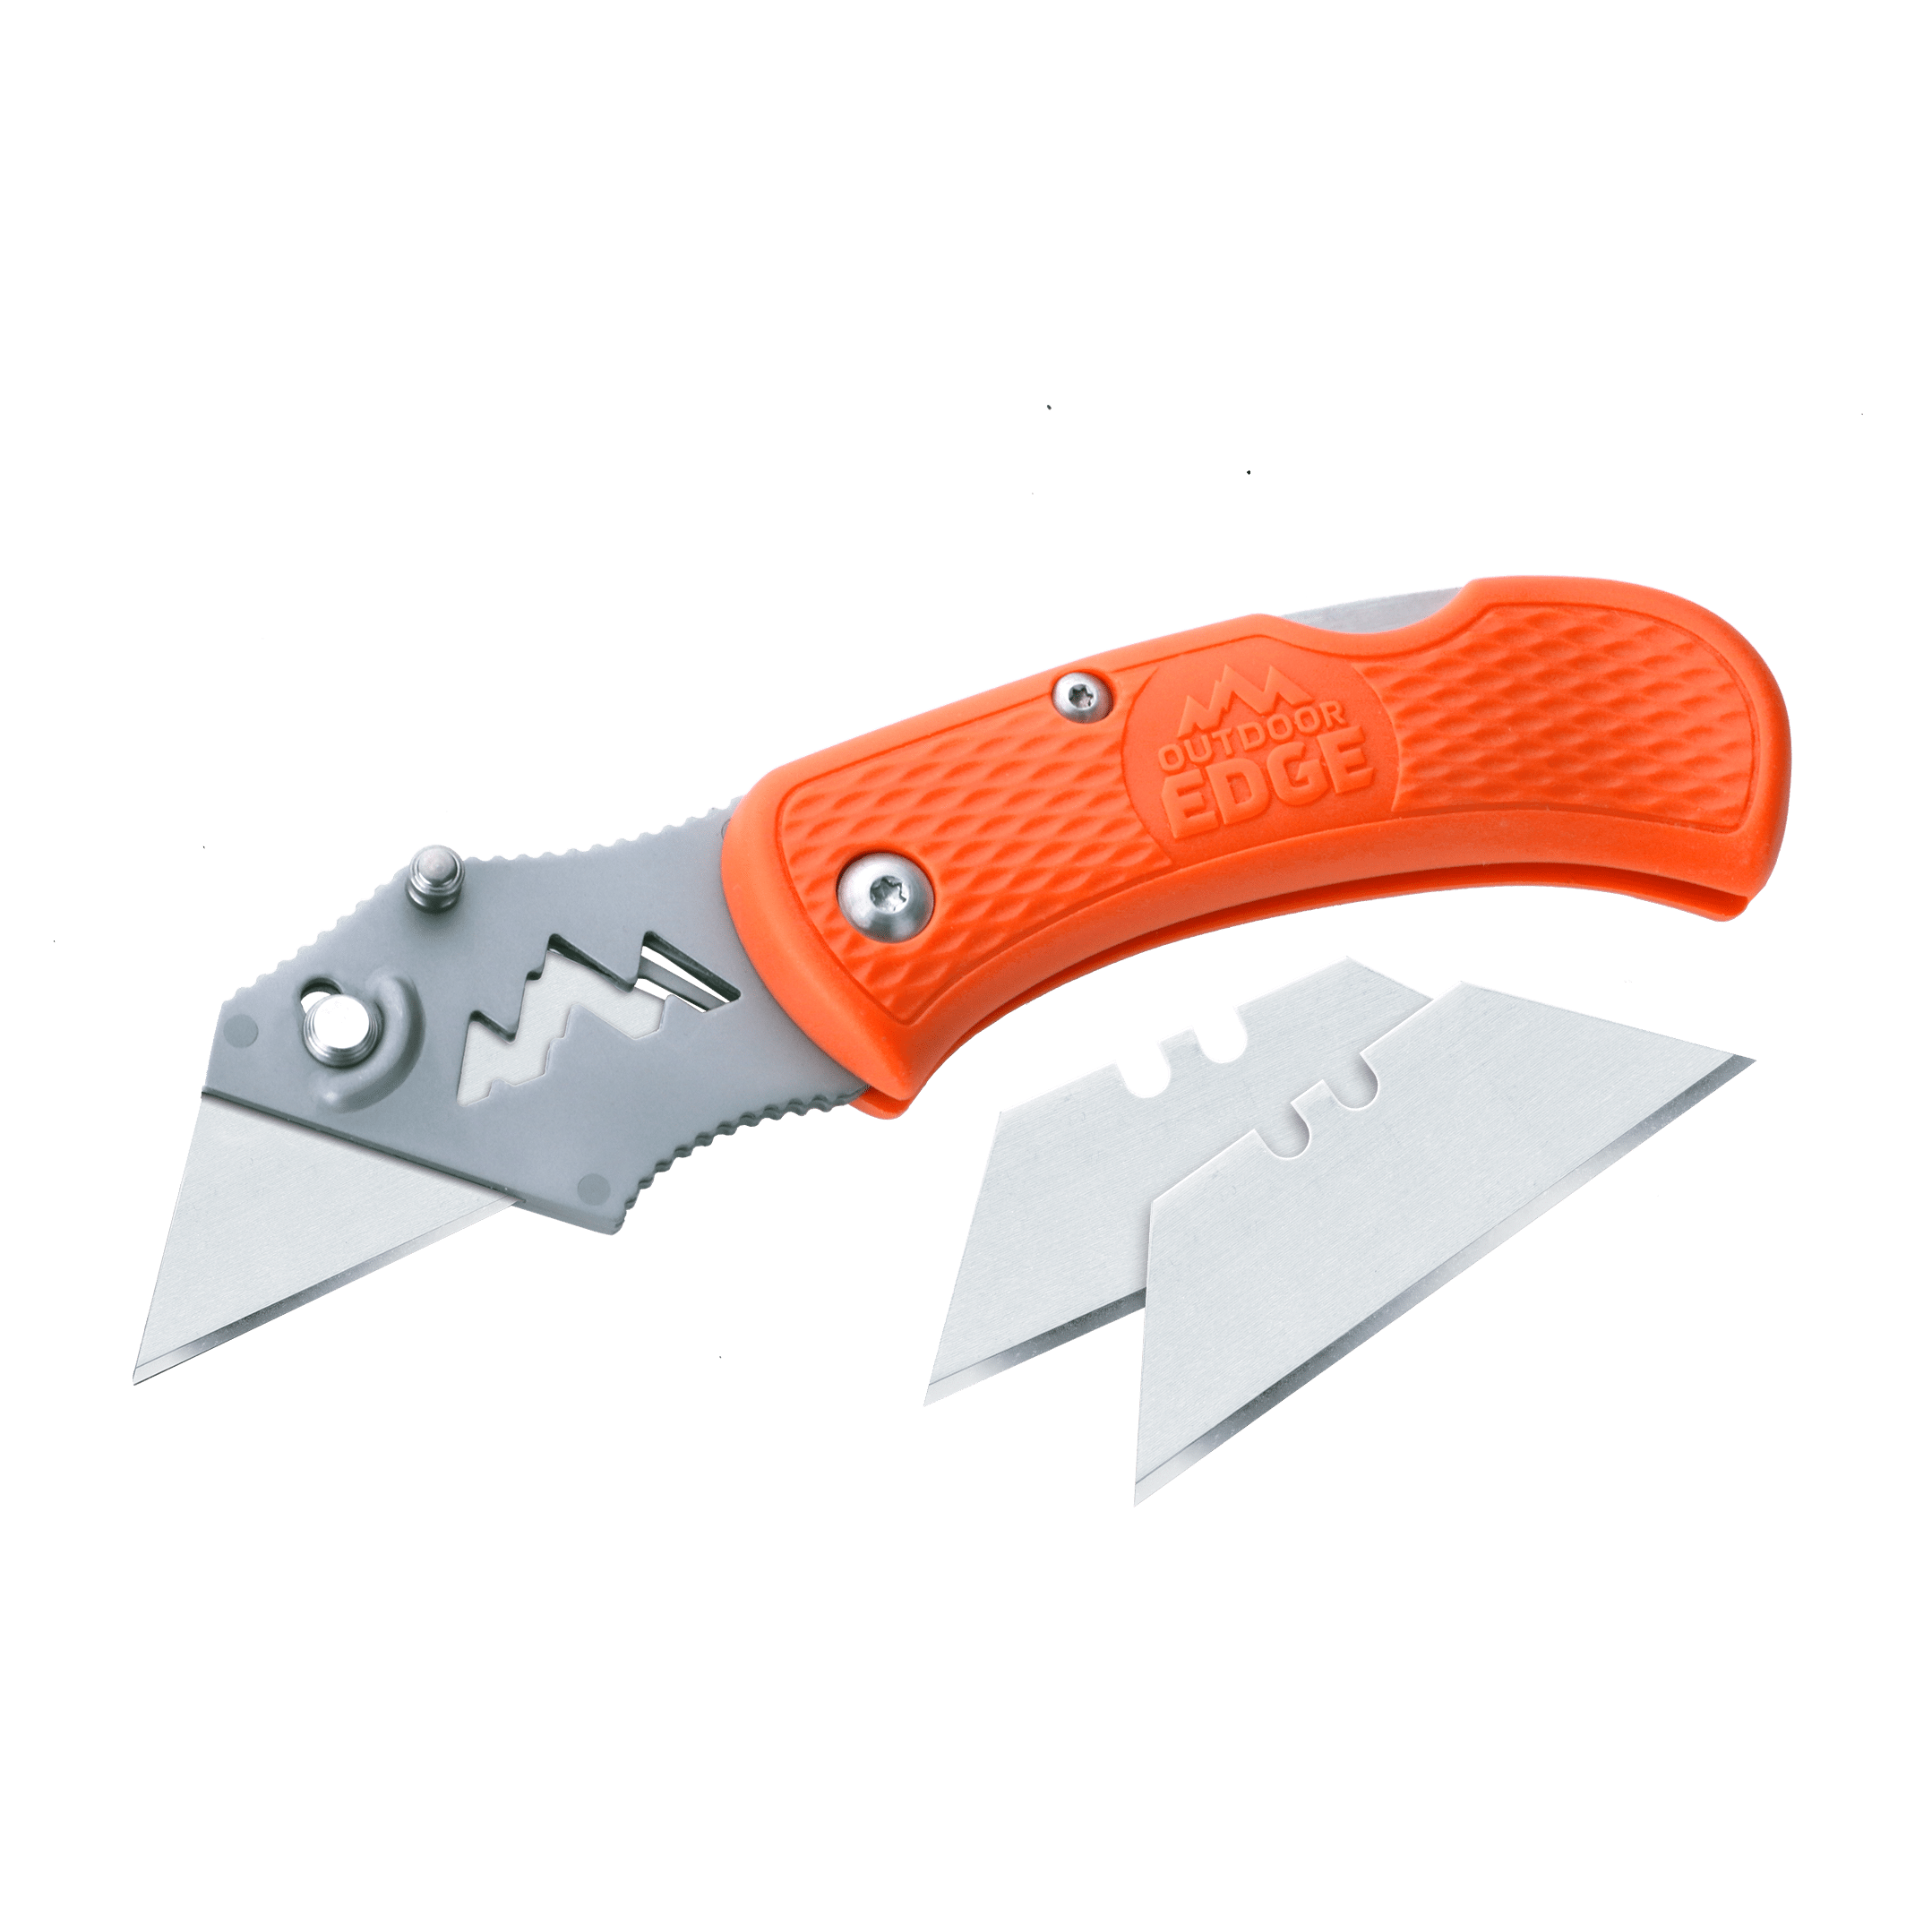 Outdoor Edge Orange B.O.A. (Box Opening Assistant) Utility knife product photo